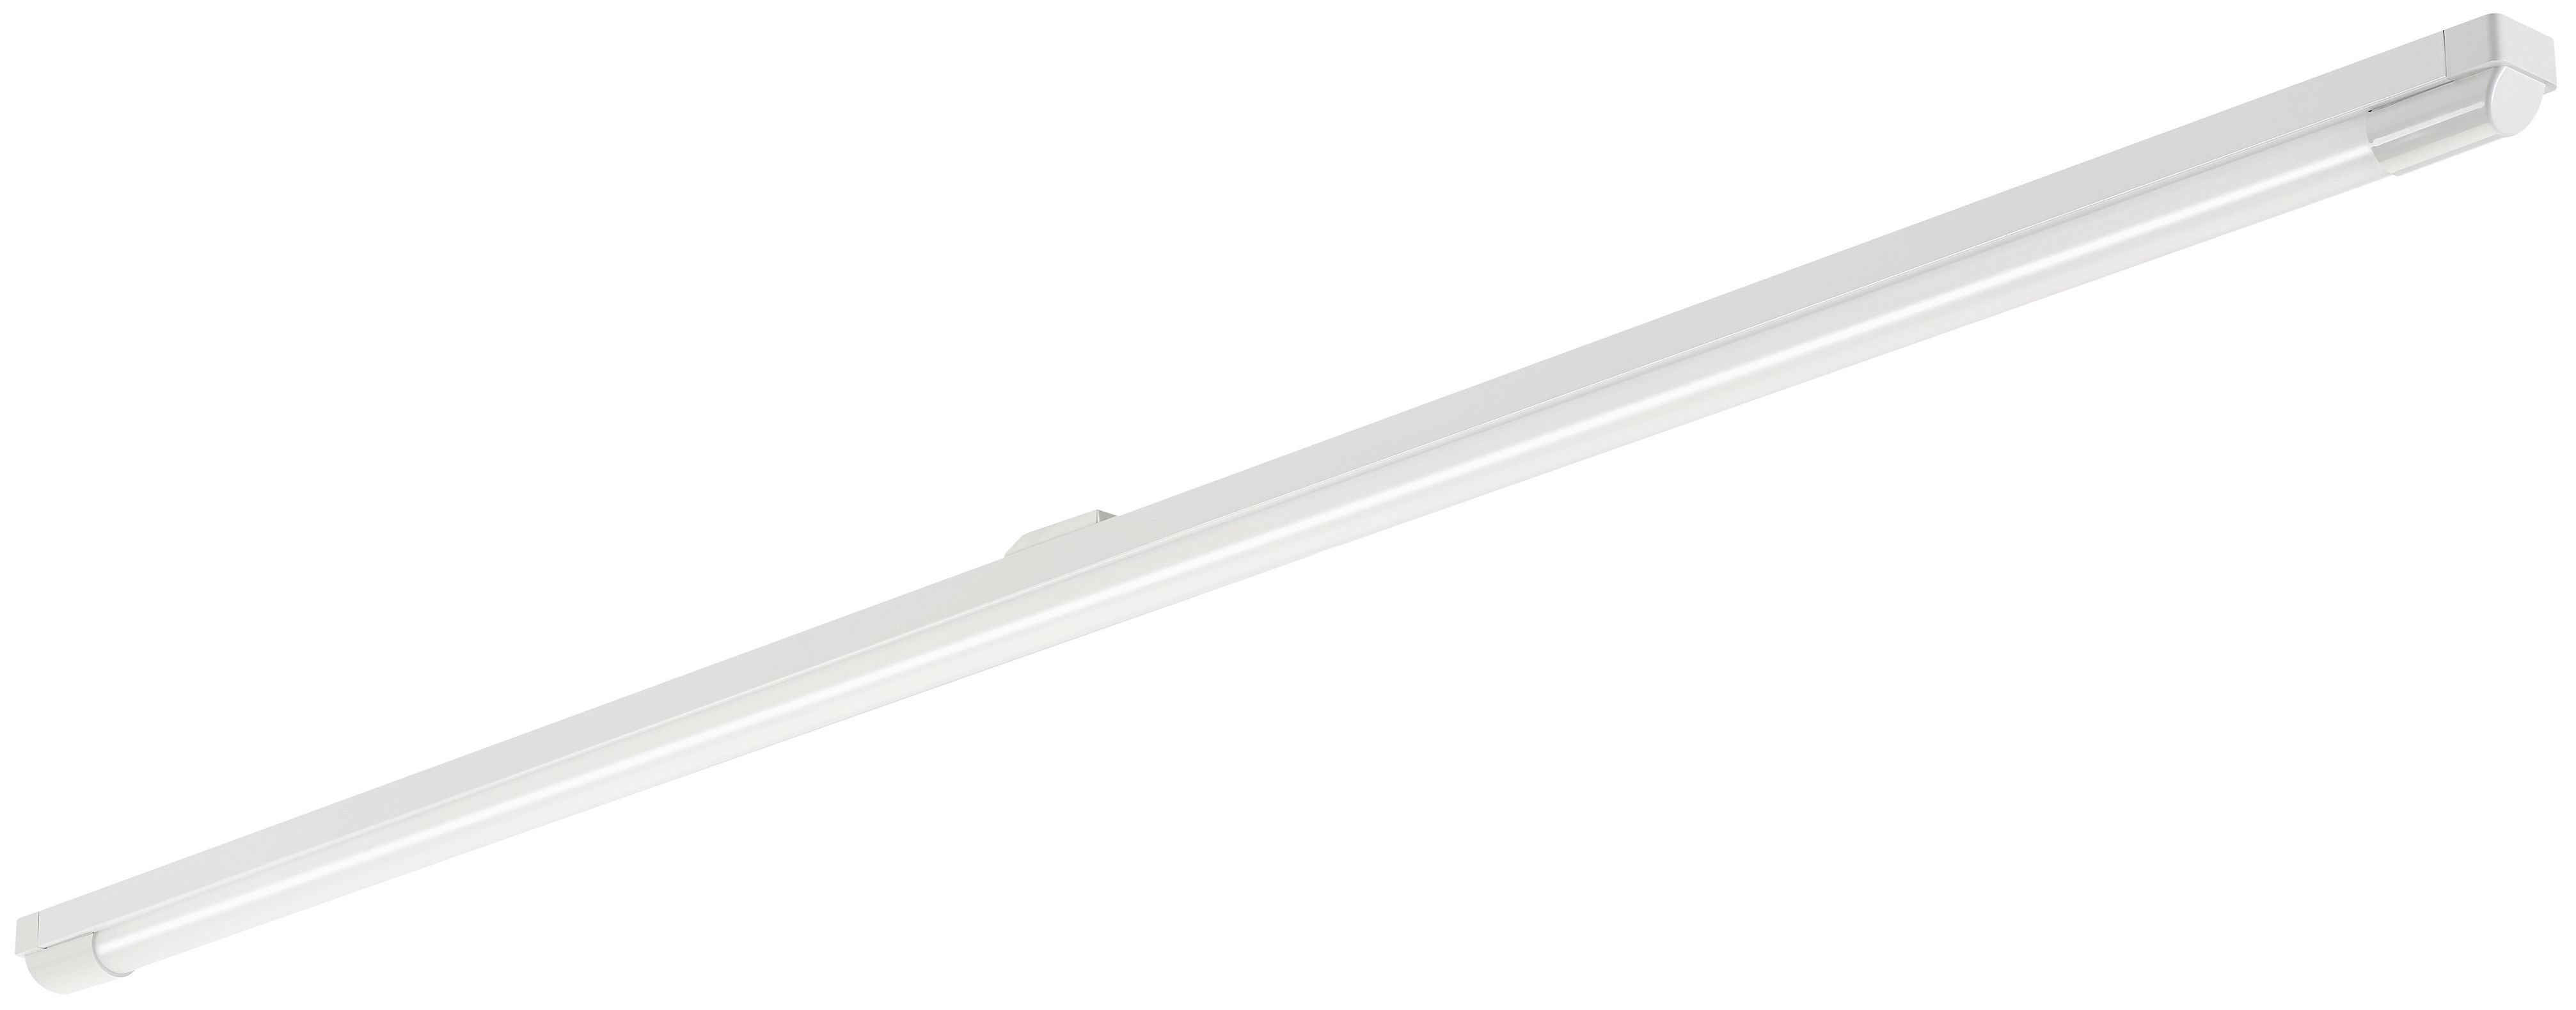 Sylvania Single 5ft IP20 Light Fitting with T8 Integrated LED Tube - 18W